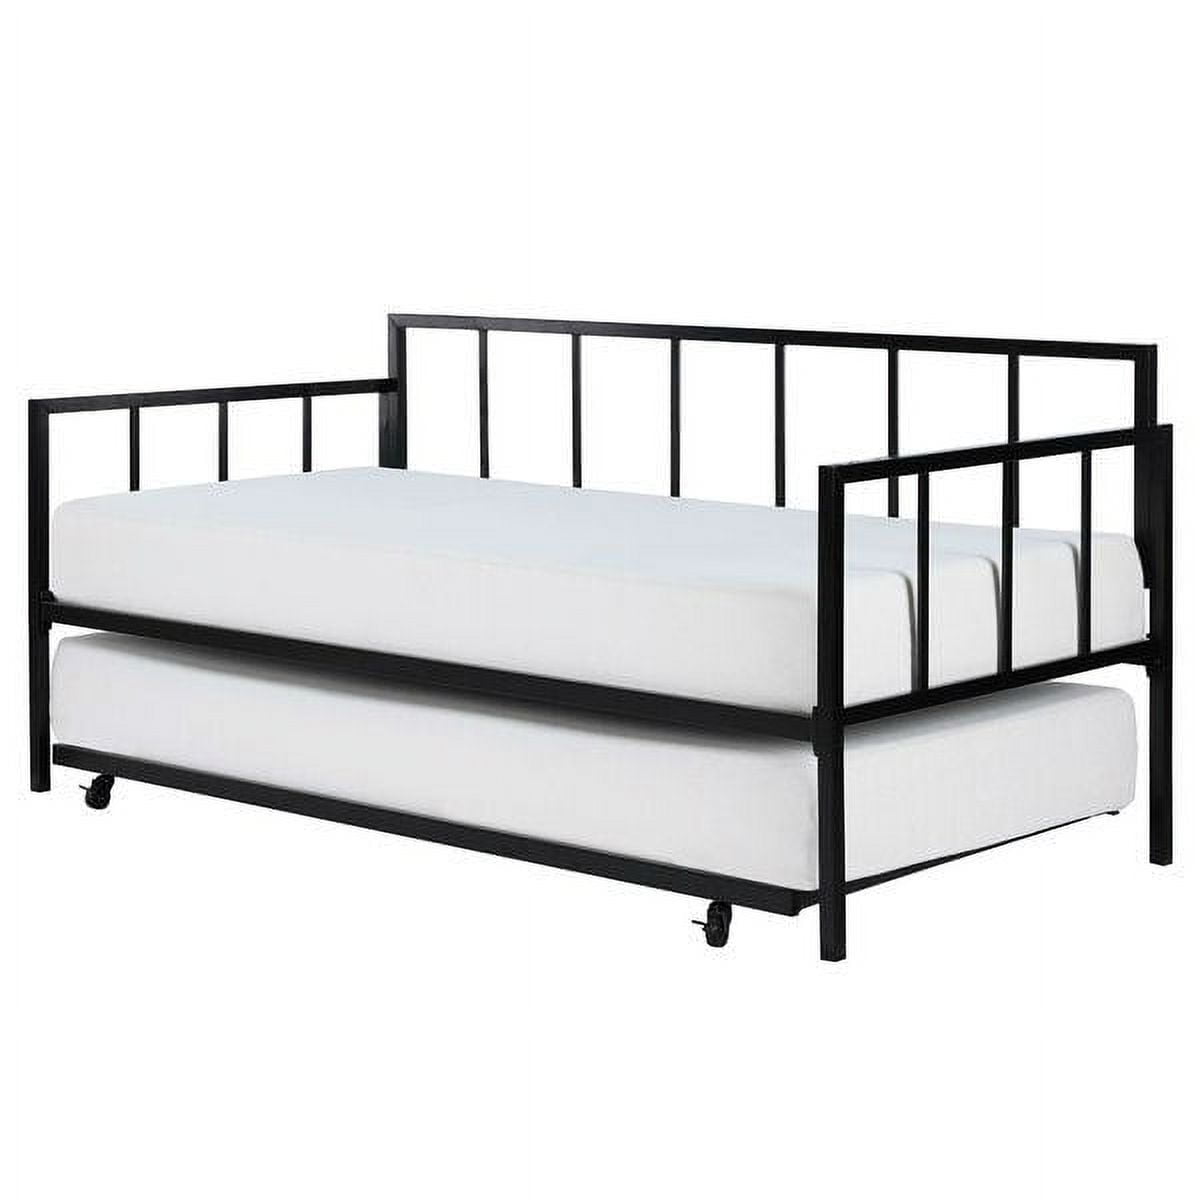 Twin size Heavy Duty Metal Daybed with Roll-Out Trundle Bed - Walmart.com